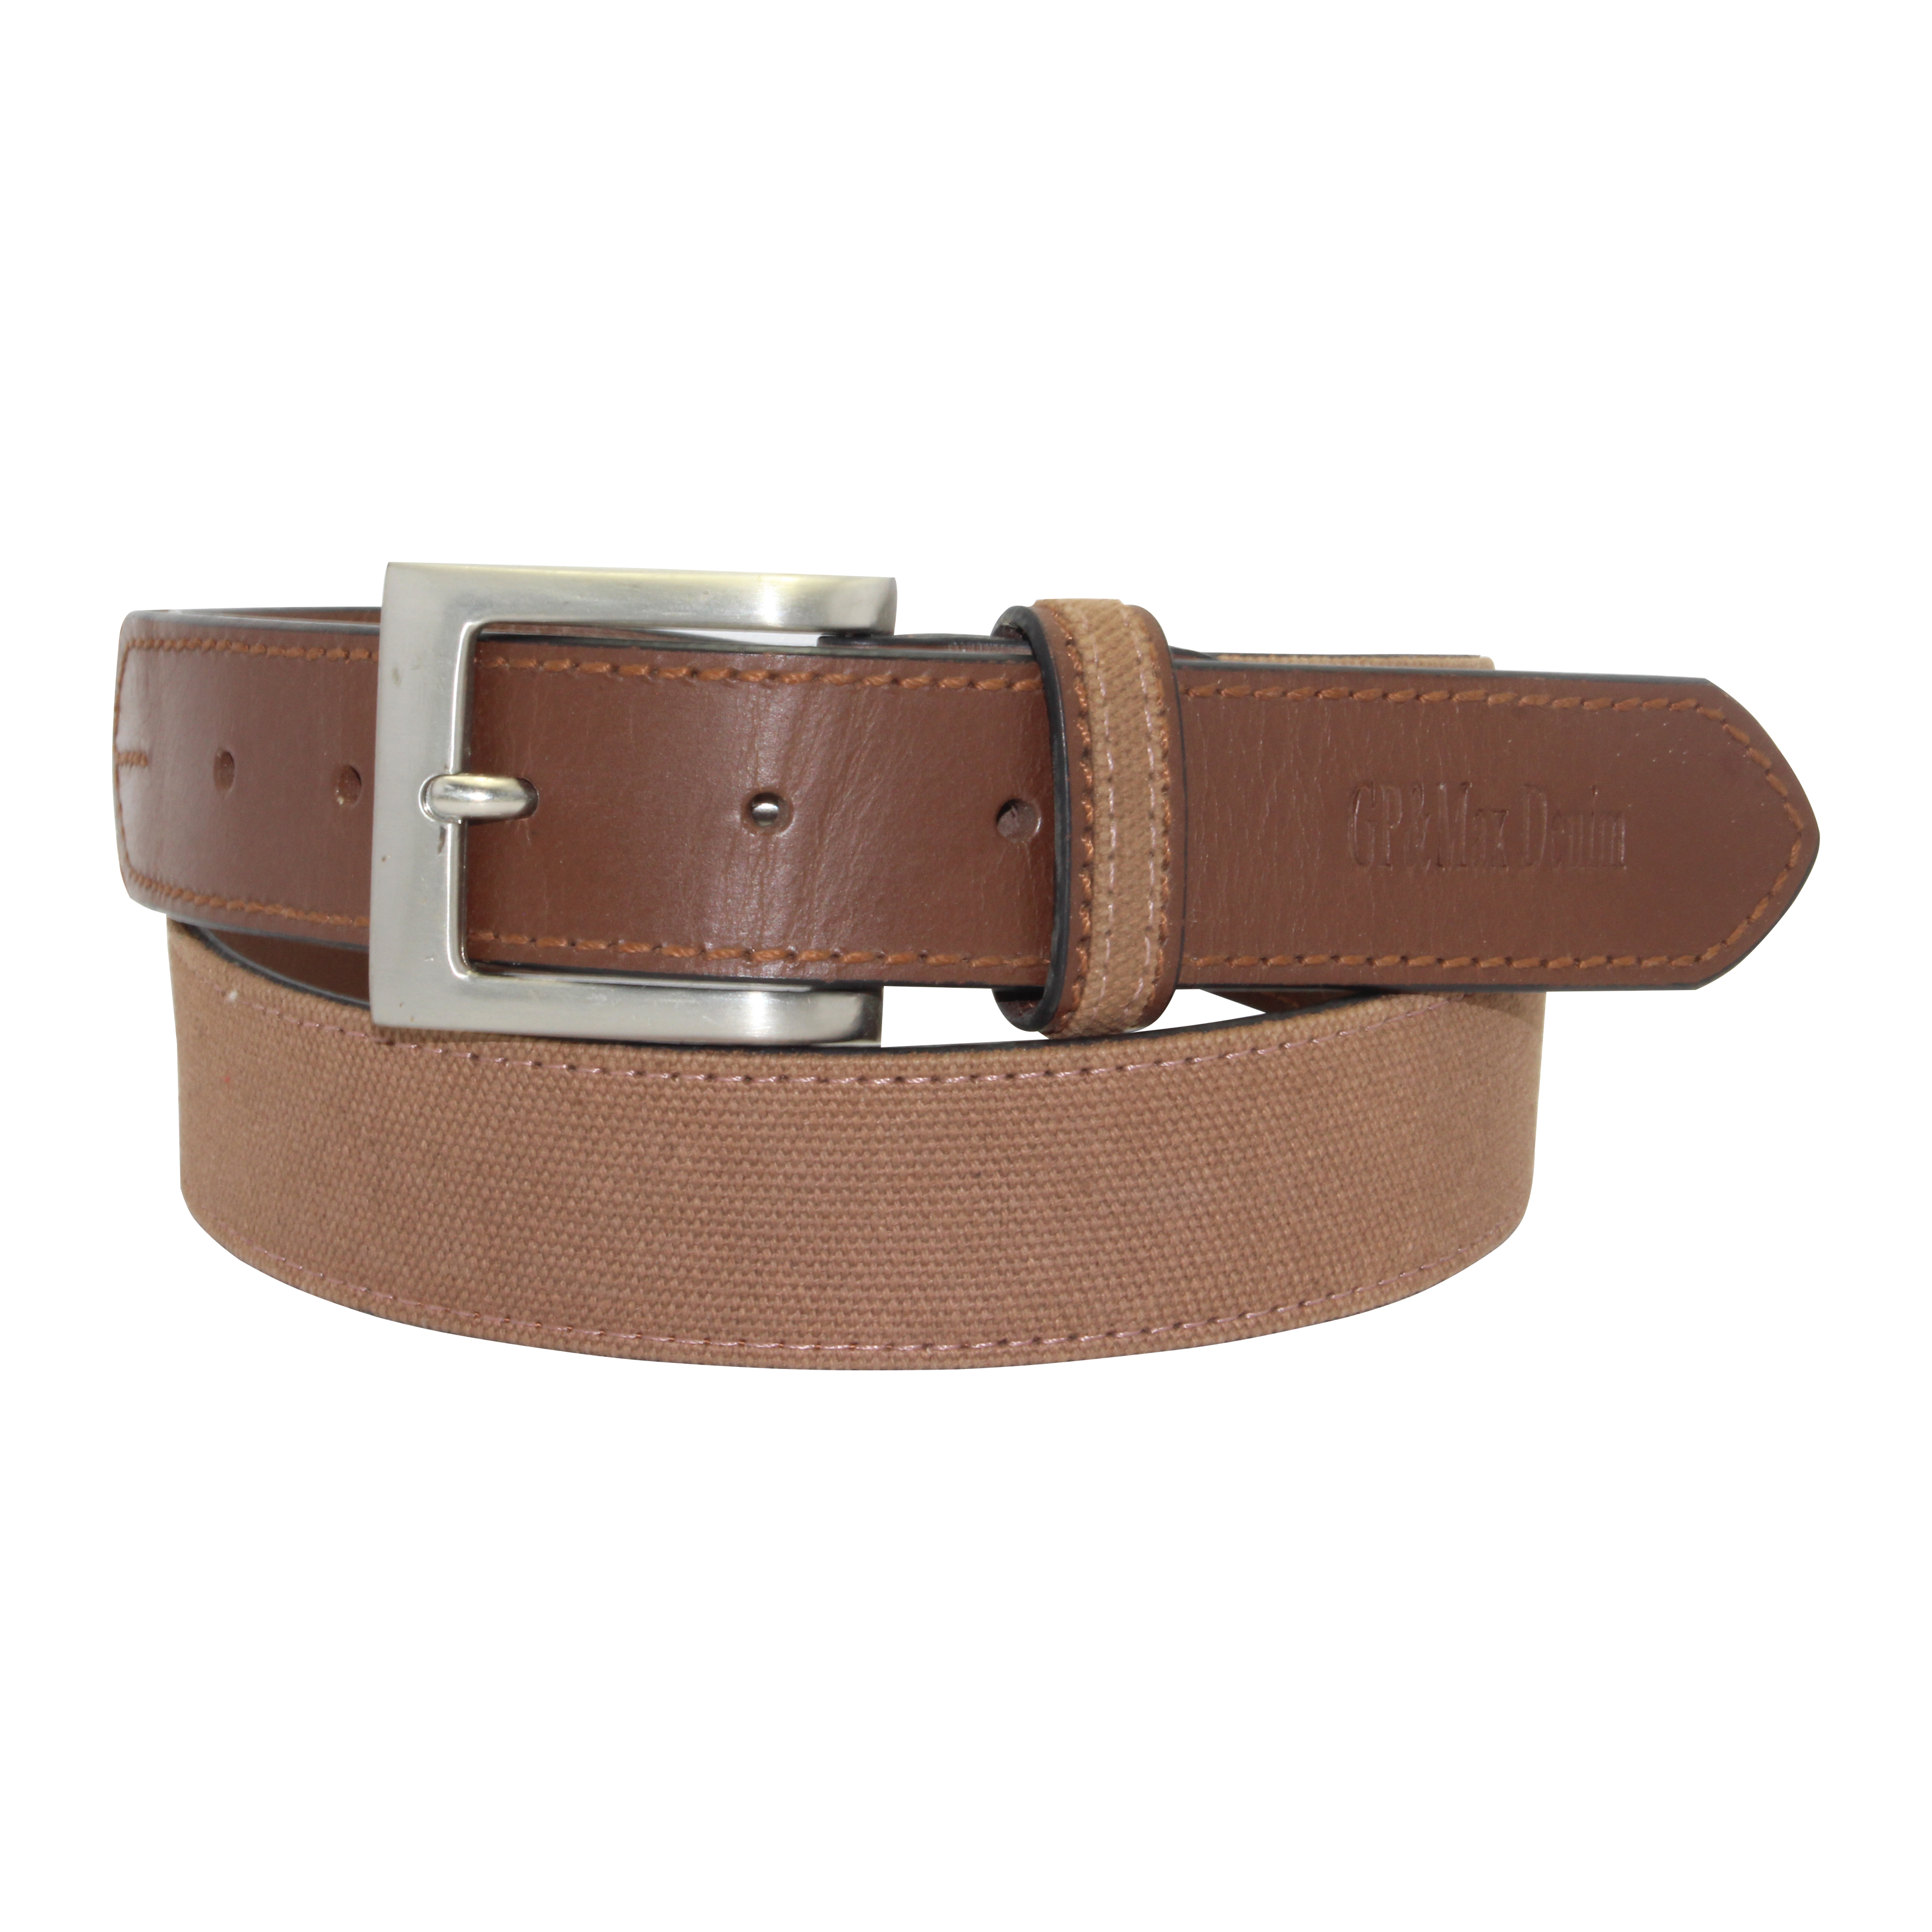 Timeless Elegance: Classic <a href='/genuine-leather-belt/'>Genuine Leather Belt</a>s that Never Go Out of Style